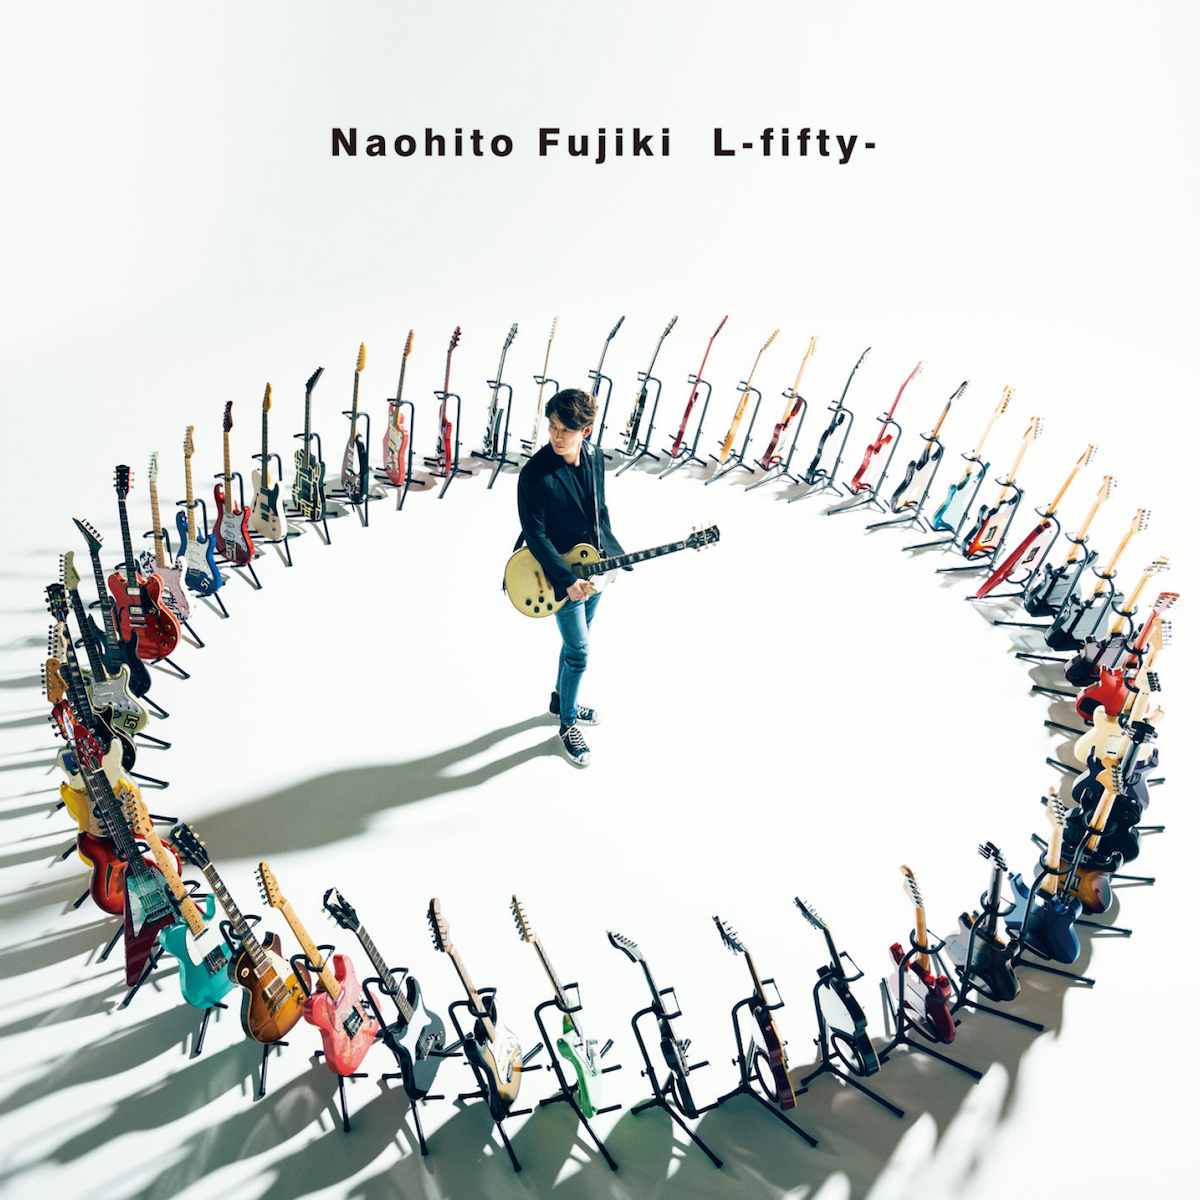 Naohito Fujiki 50th Anniversary Album "L-fify" Normal Edition (CD Only) Release on July 13th, 2022